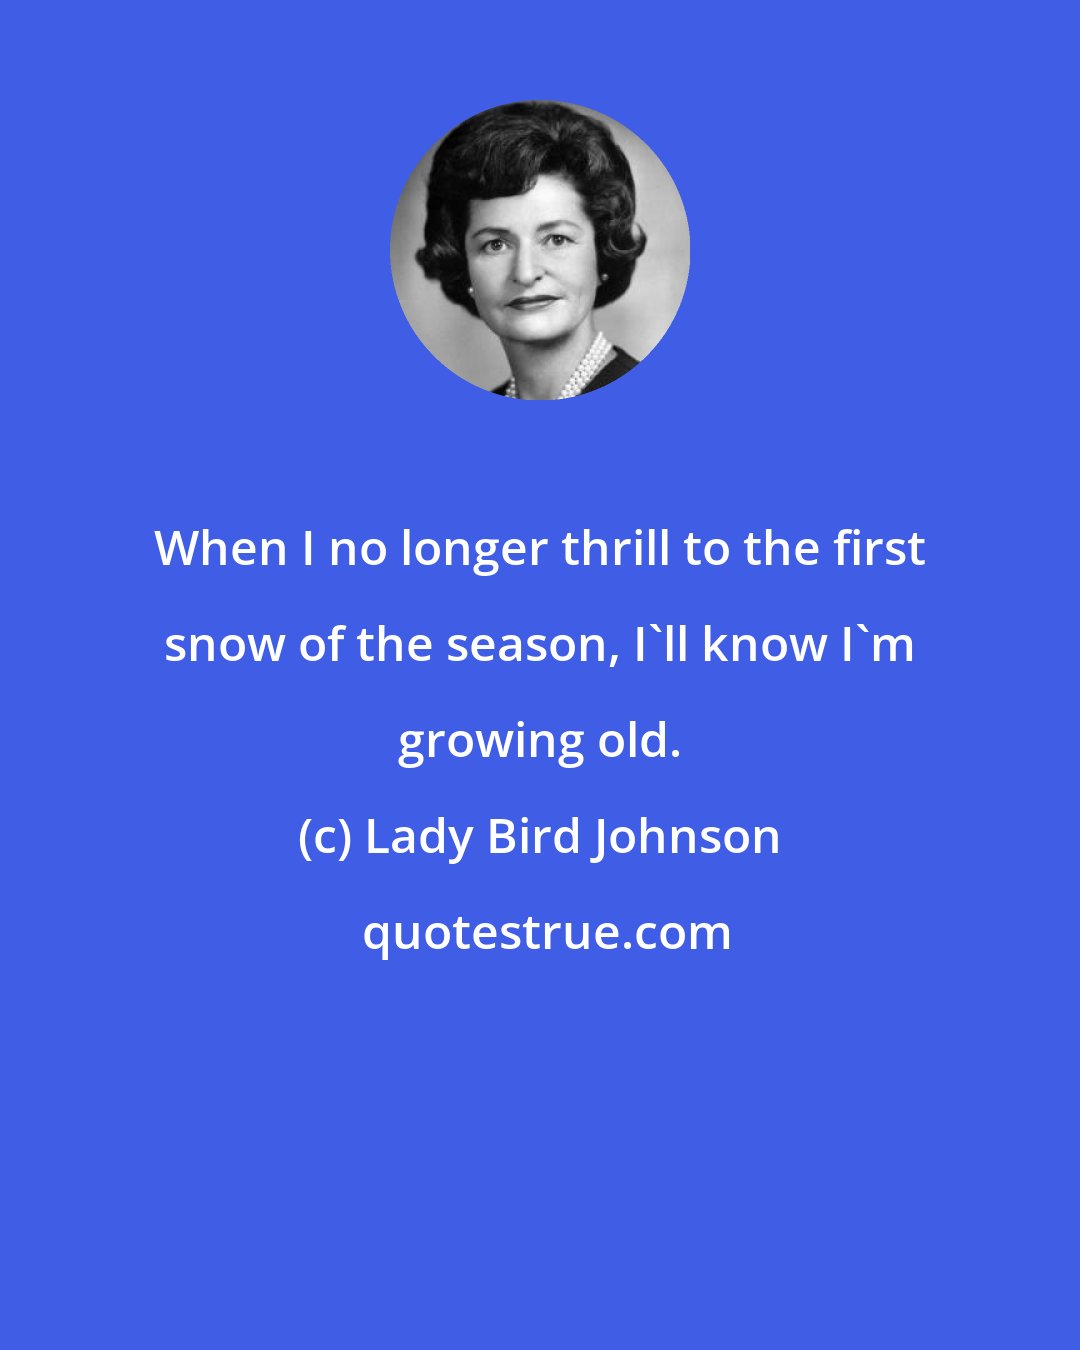 Lady Bird Johnson: When I no longer thrill to the first snow of the season, I'll know I'm growing old.